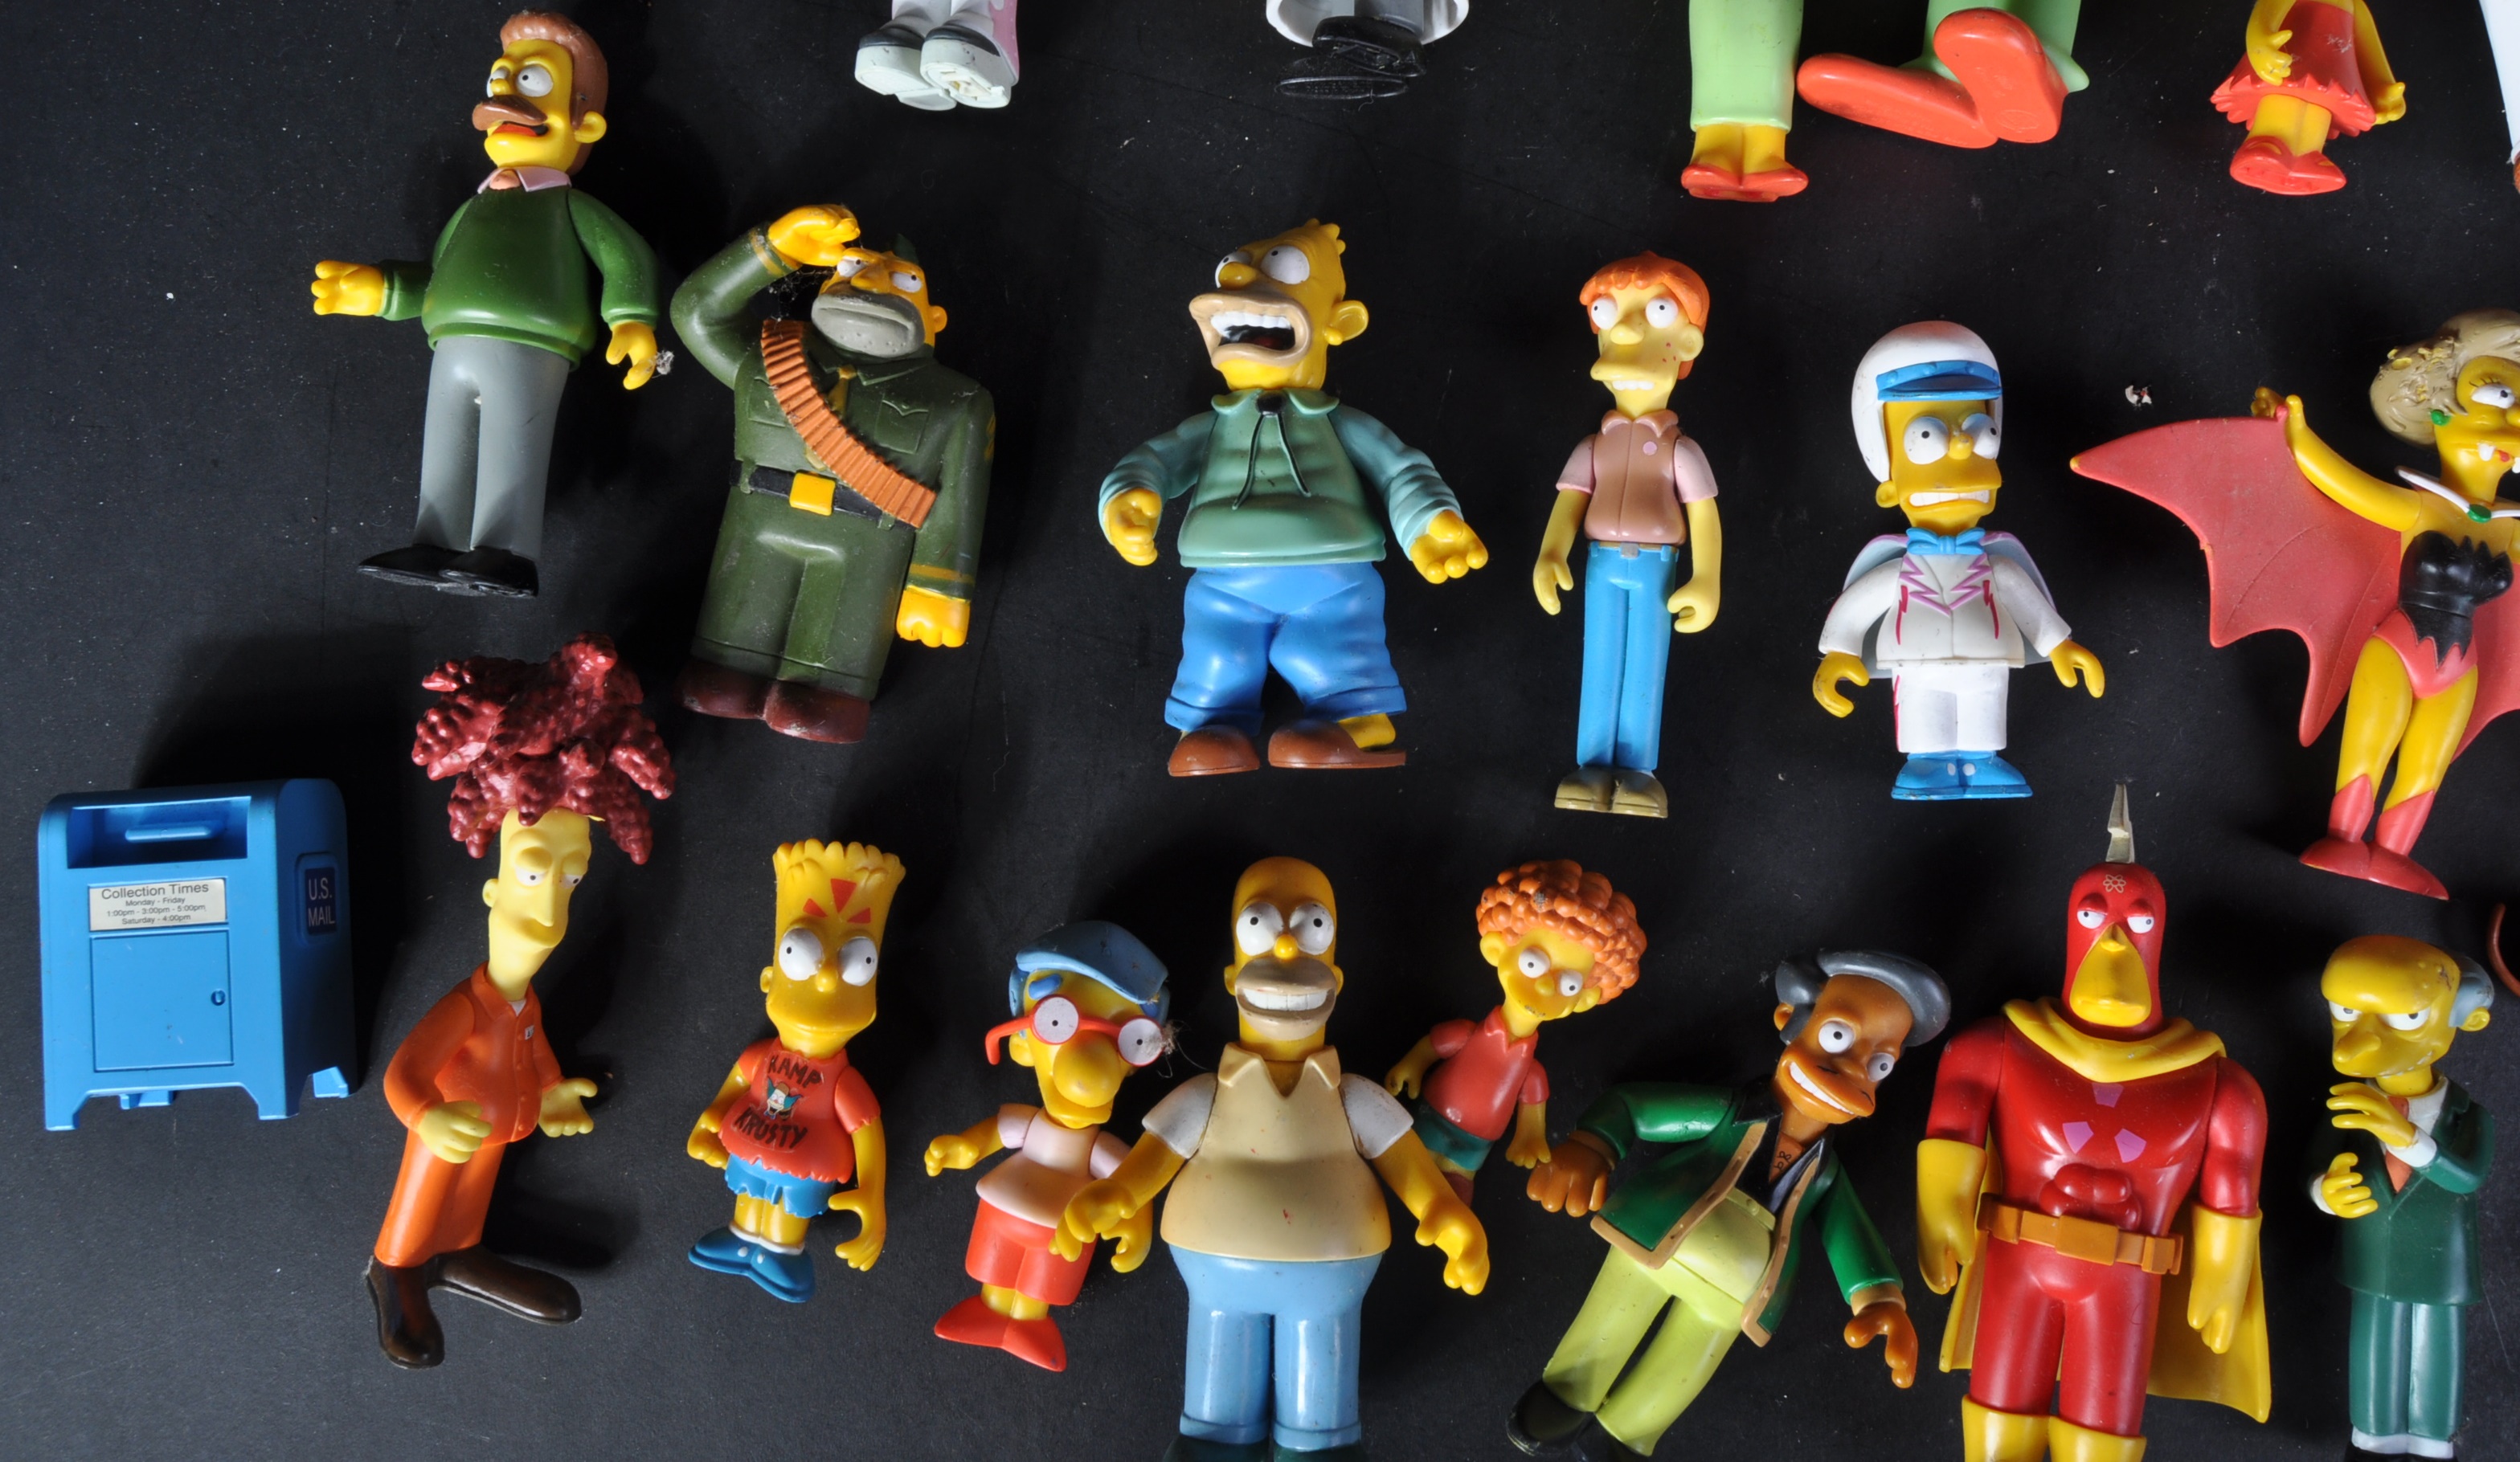 THE SIMPSONS - PLAYMATES ' WORLD OF SPRINGFIELD ' FIGURINES - Image 5 of 5